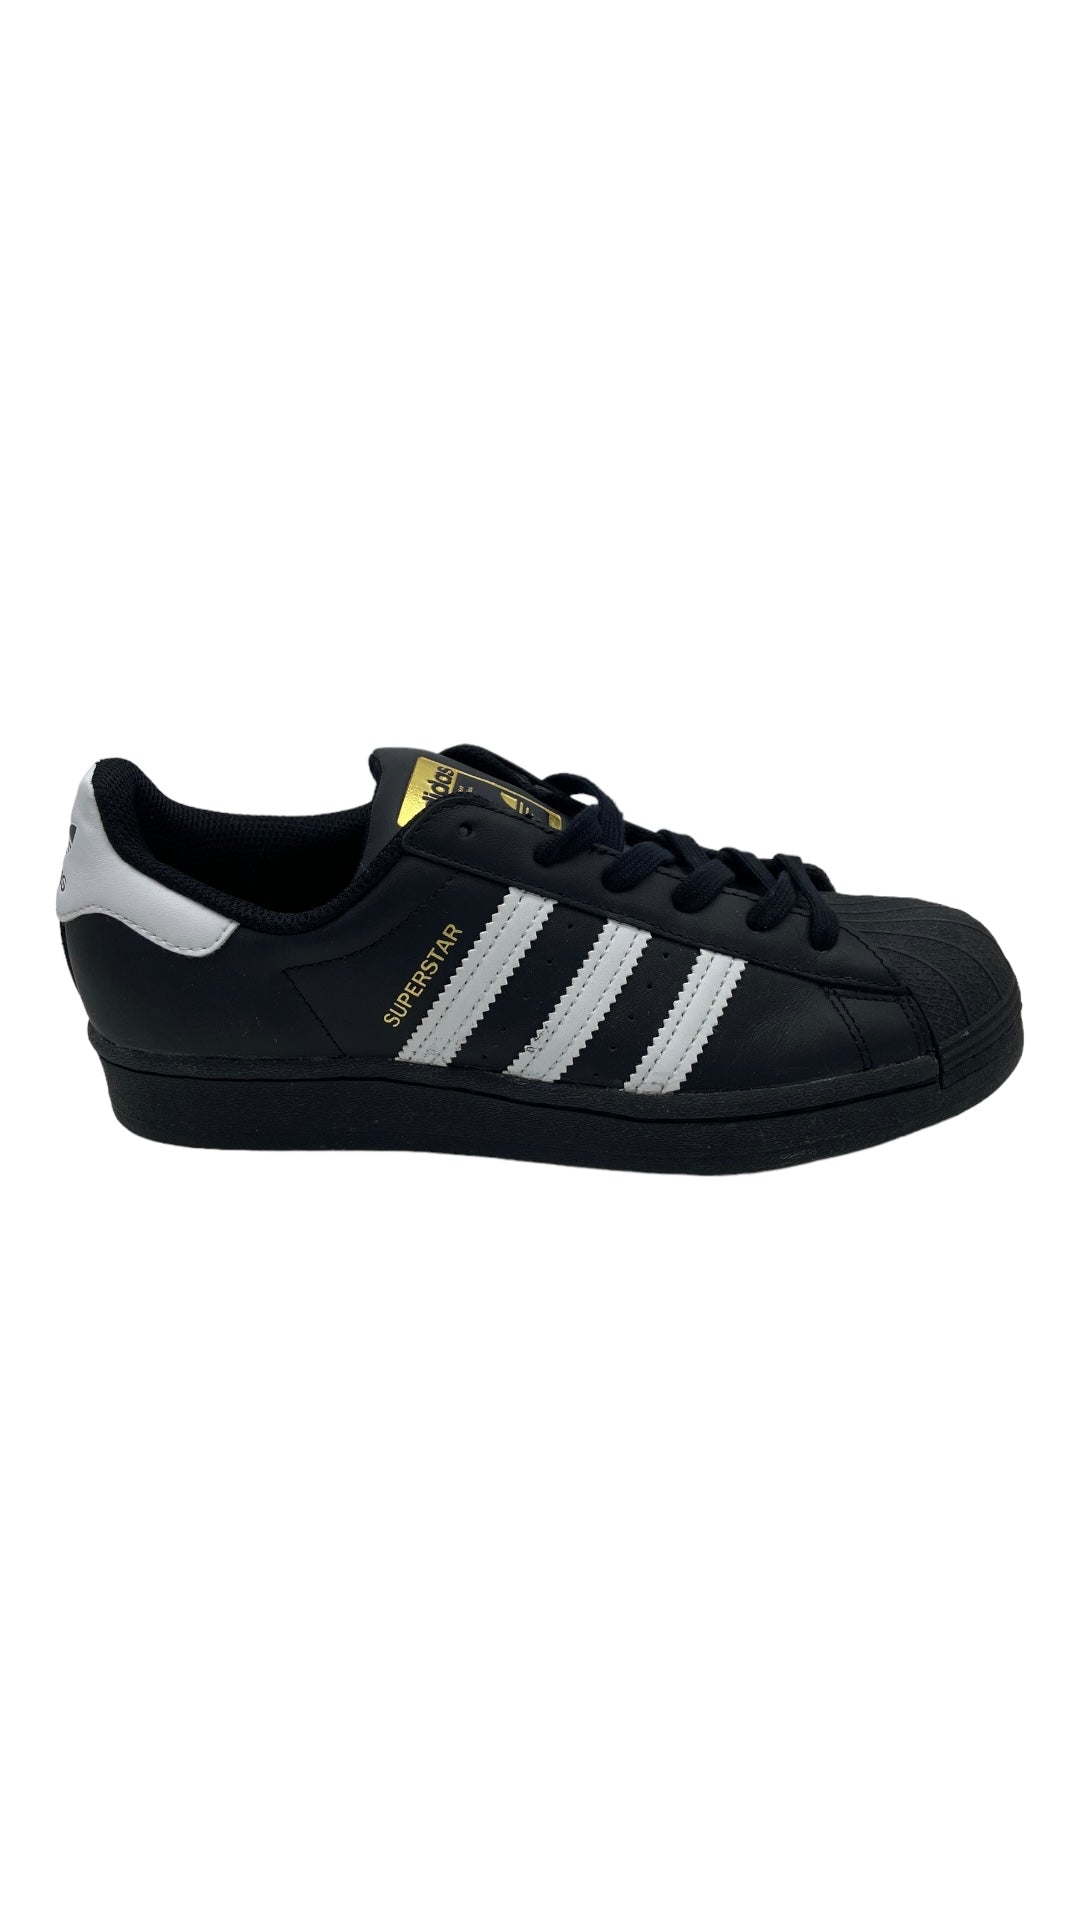 Preowned Adidas Superstar Core Black Cloud White Gold (GS) Sz 6M/7.5W